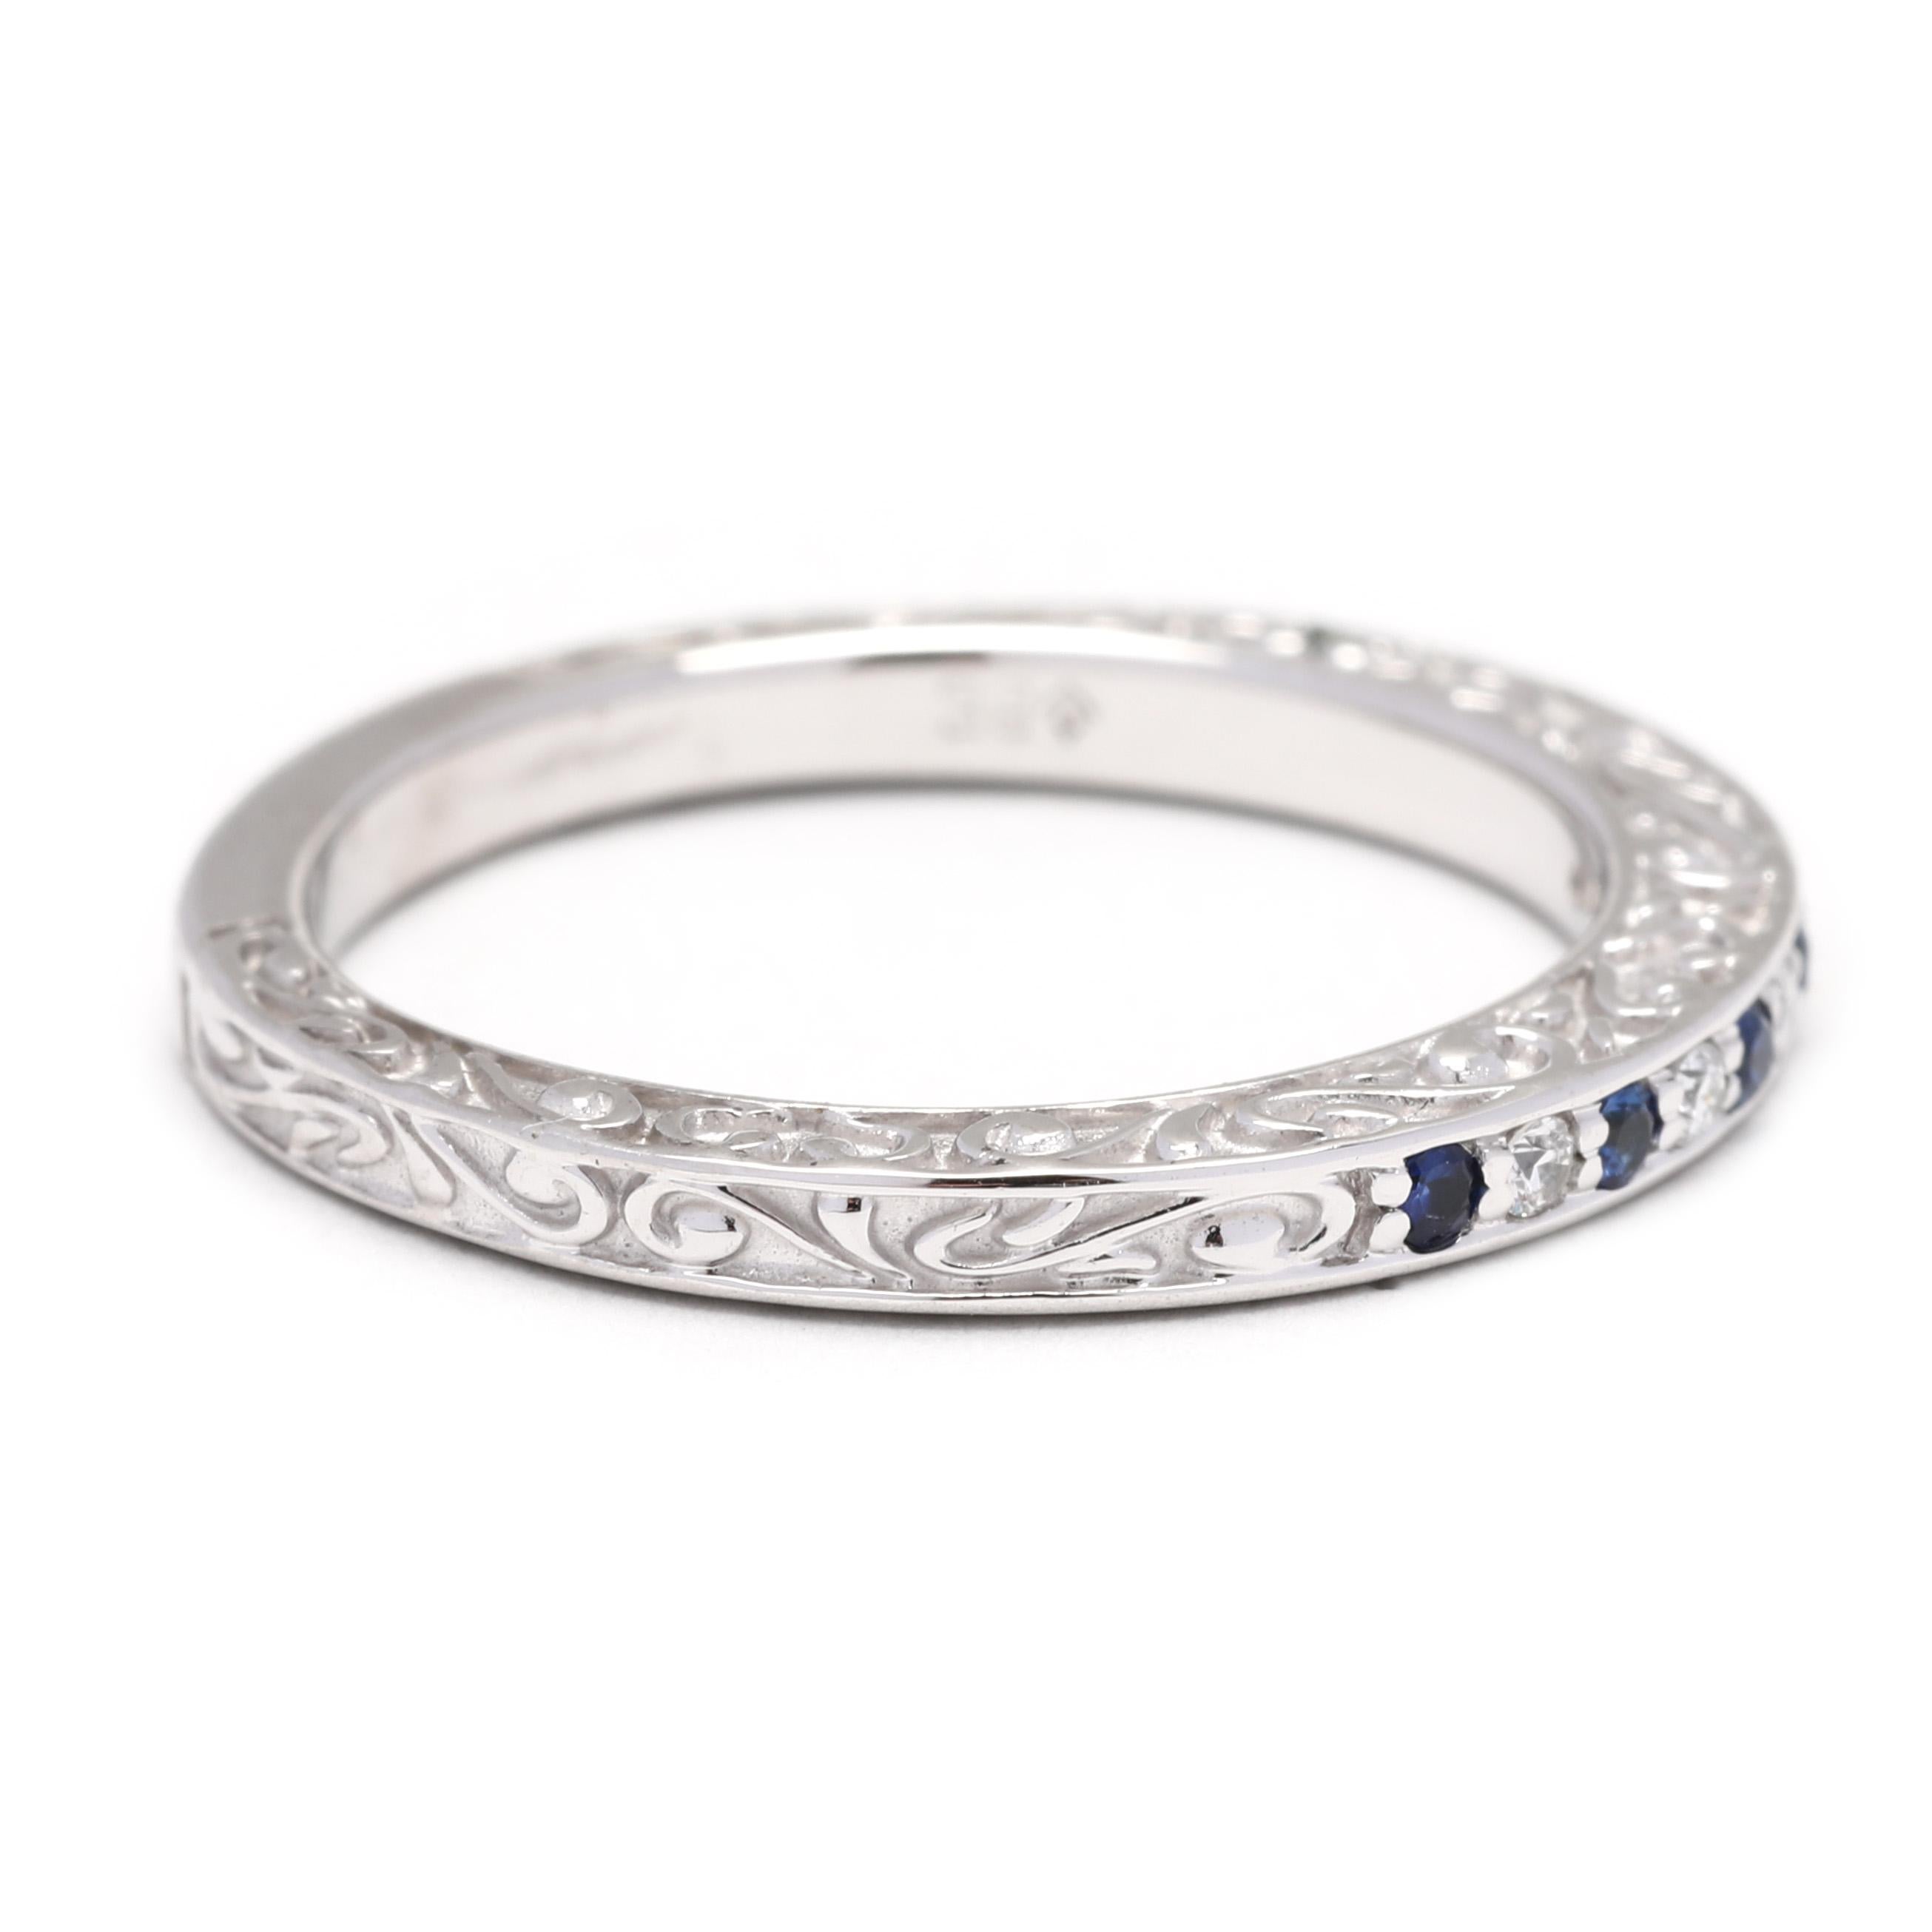 This elegant 0.09ctw sapphire and diamond wedding band in 18K white gold is ideal for making an intimate statement. With a delicate thin band and intricate diamond and sapphire engravings, this gorgeous ring is the perfect way to commemorate your